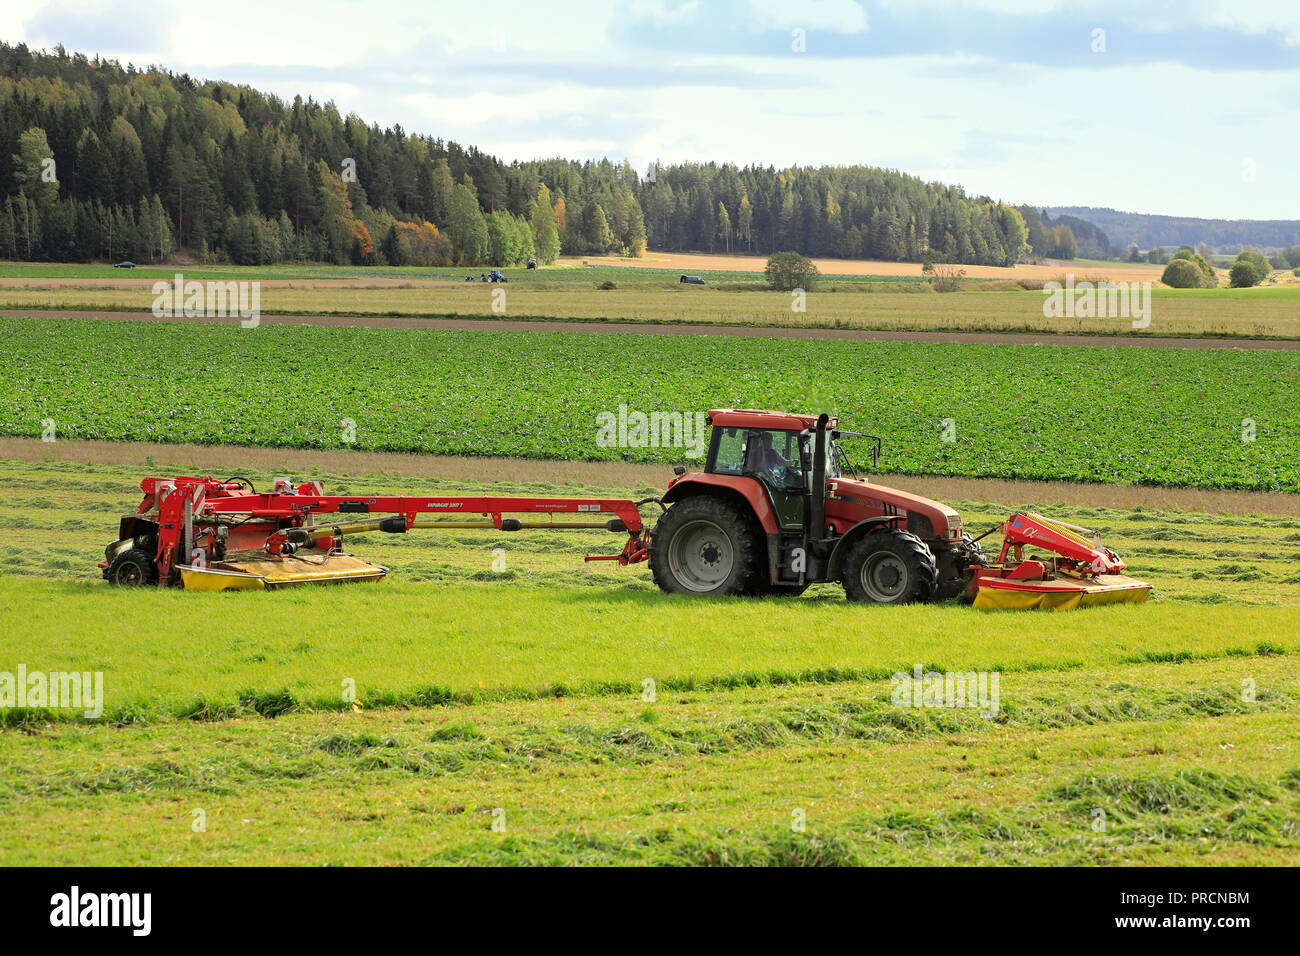 Salo, Finland - September 23, 2018: Farmer cuts hay on farmland with NOVACAT T trailed disc mower pulled by Case IH CS120 tractor on a beautiful day. Stock Photo